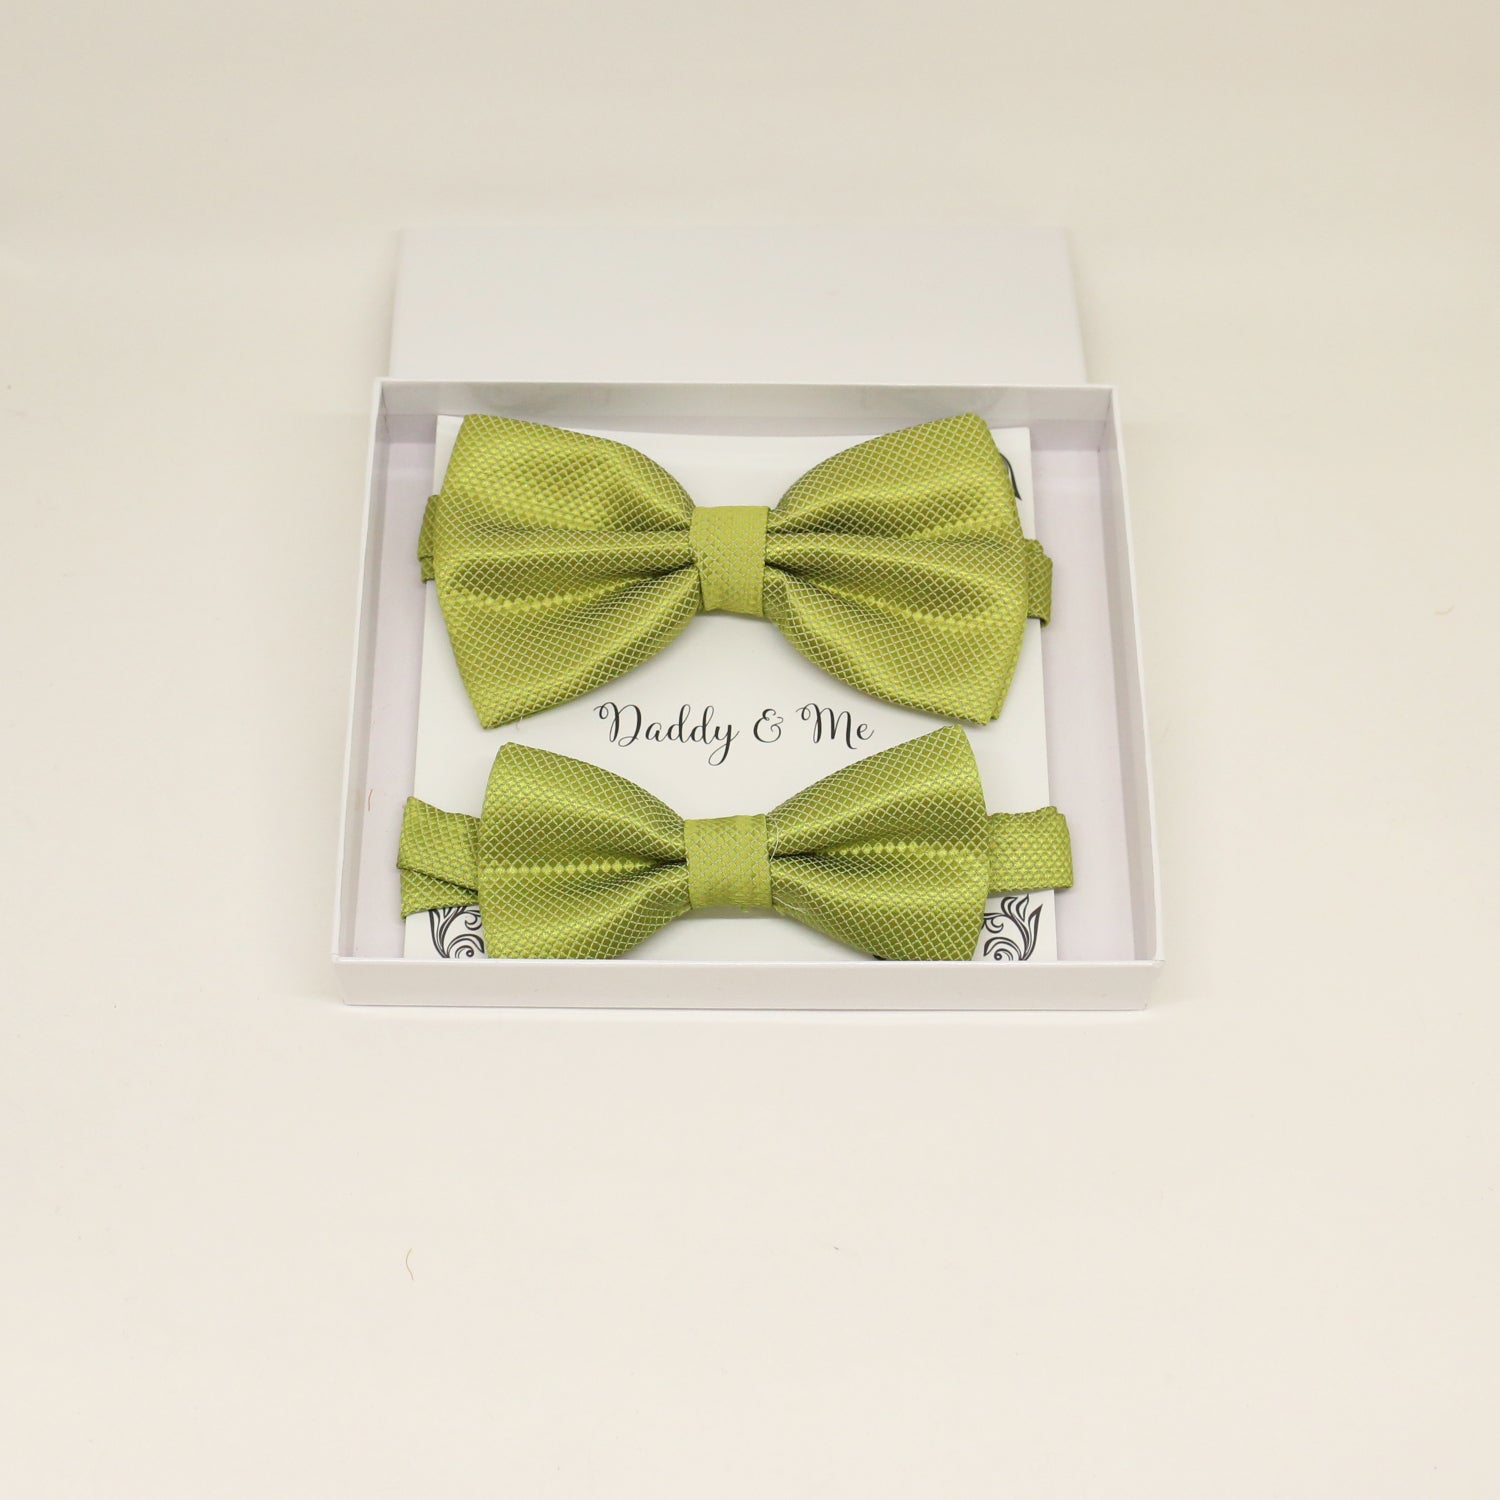 Green Bow tie set for daddy and son, Daddy and me gift set, Grandpa and me, Green Kids Toddler bow tie, Green bow tie set, Grandpa gift